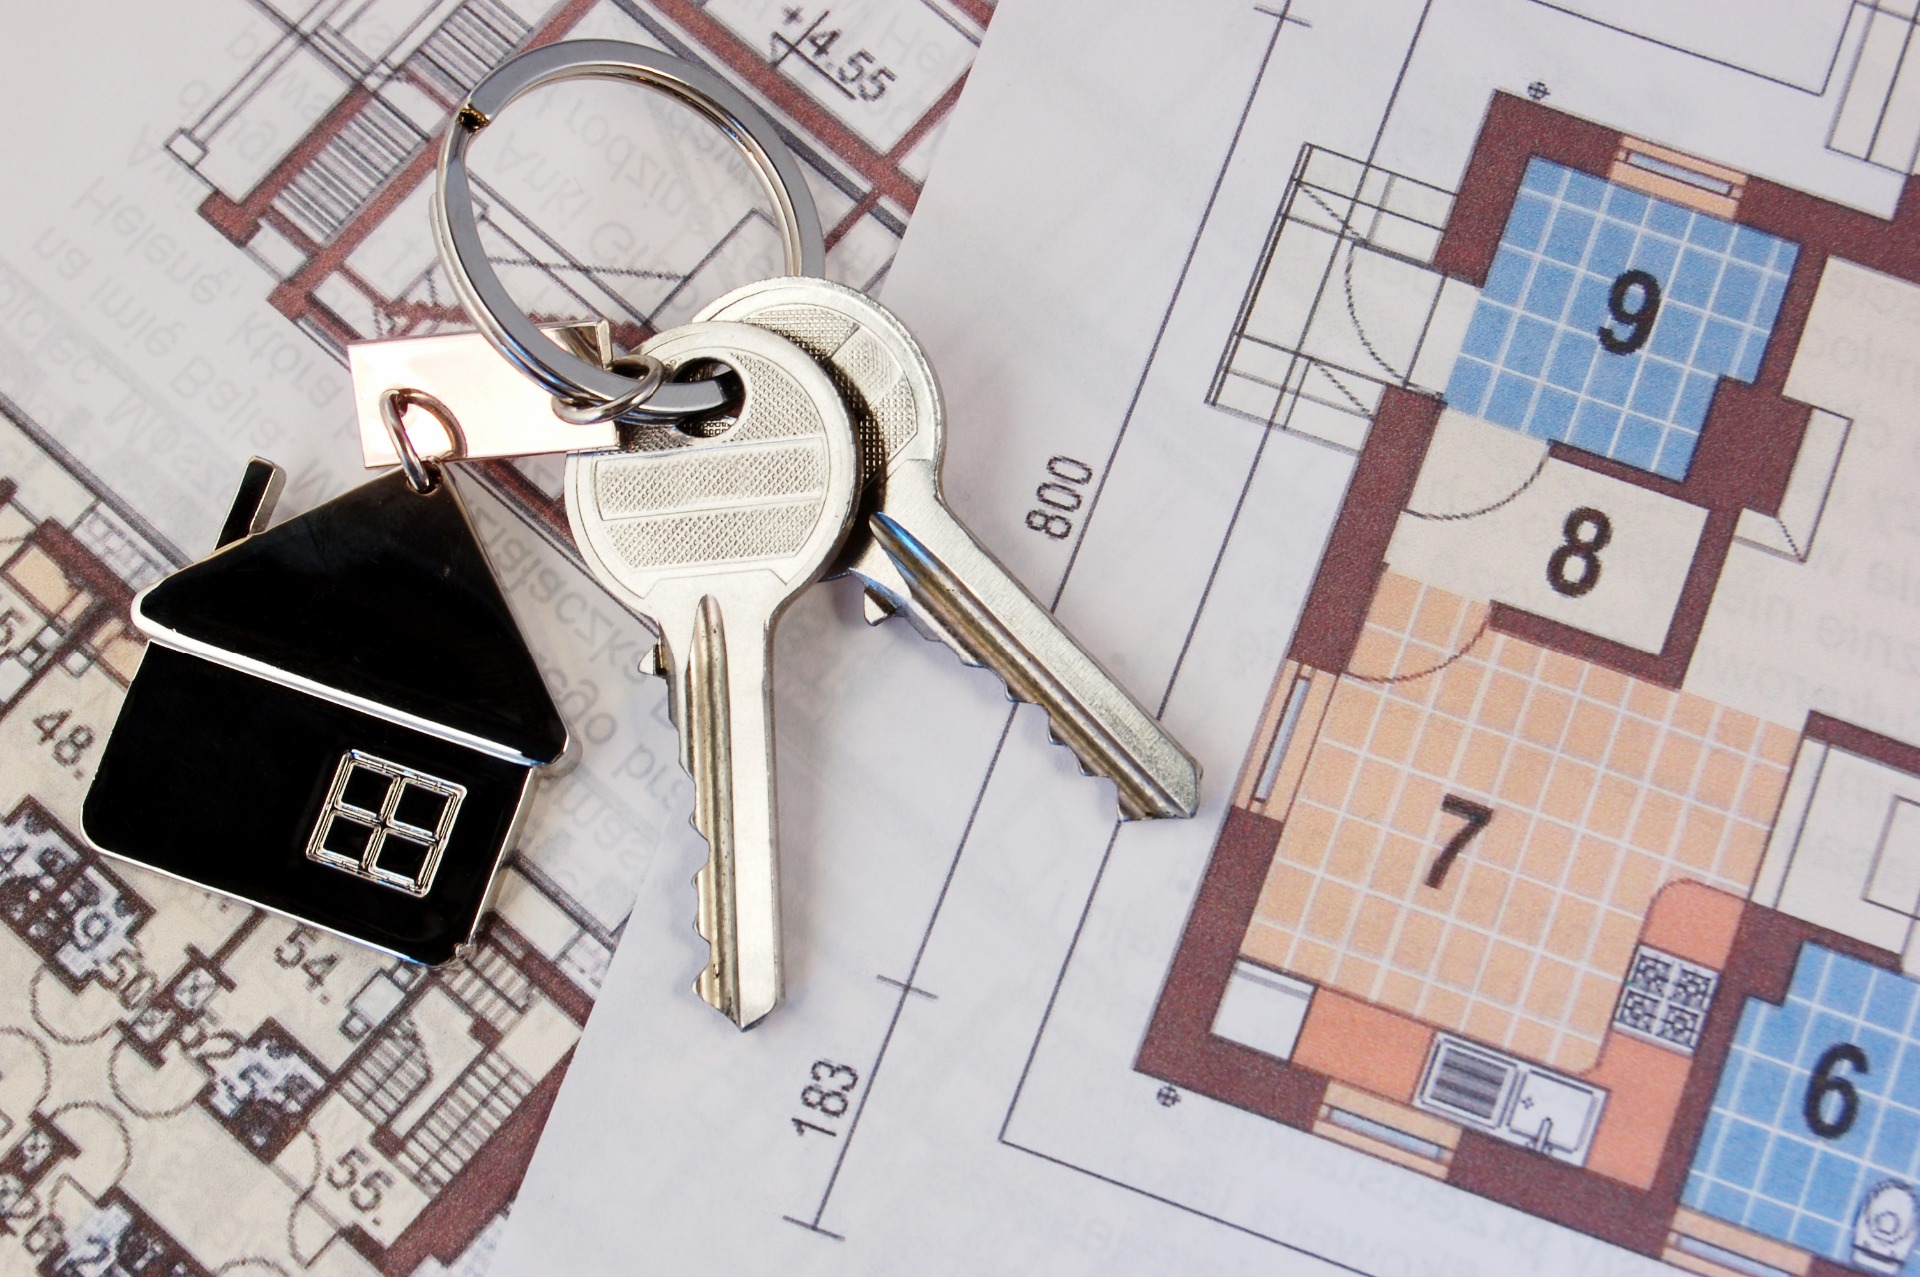 House keys on a key chain with a house keyring, resting on a plan of a new house